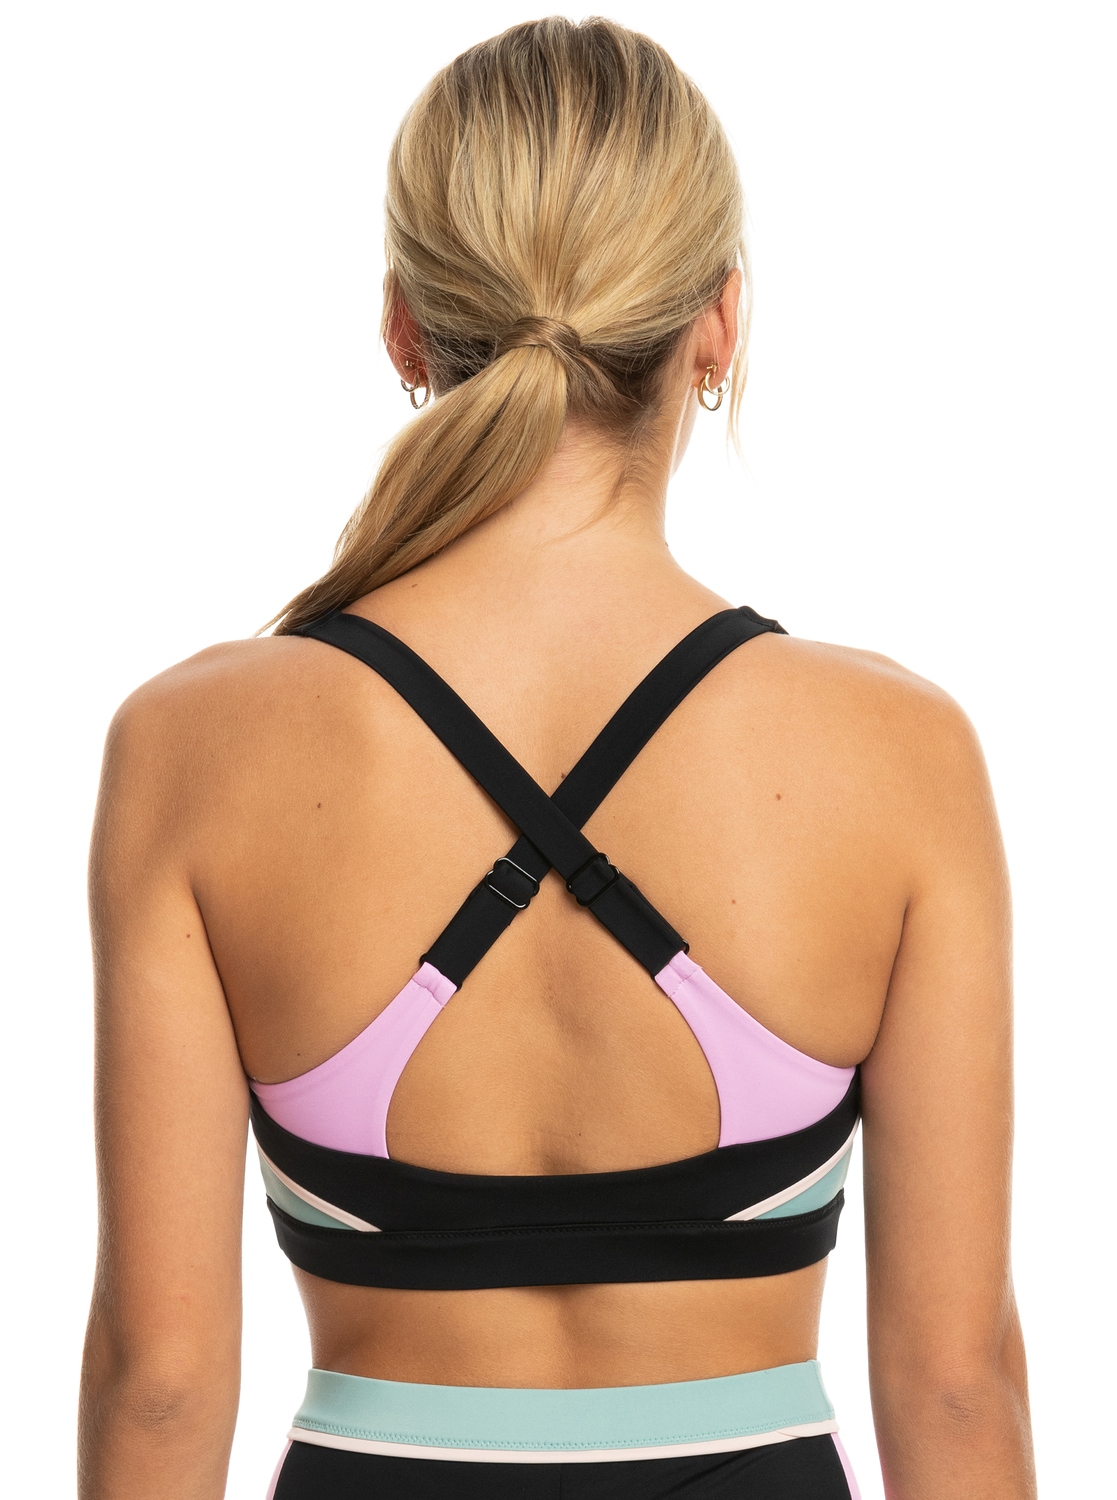 Roxy Funktionsshirt »Roxy Active Athletic«